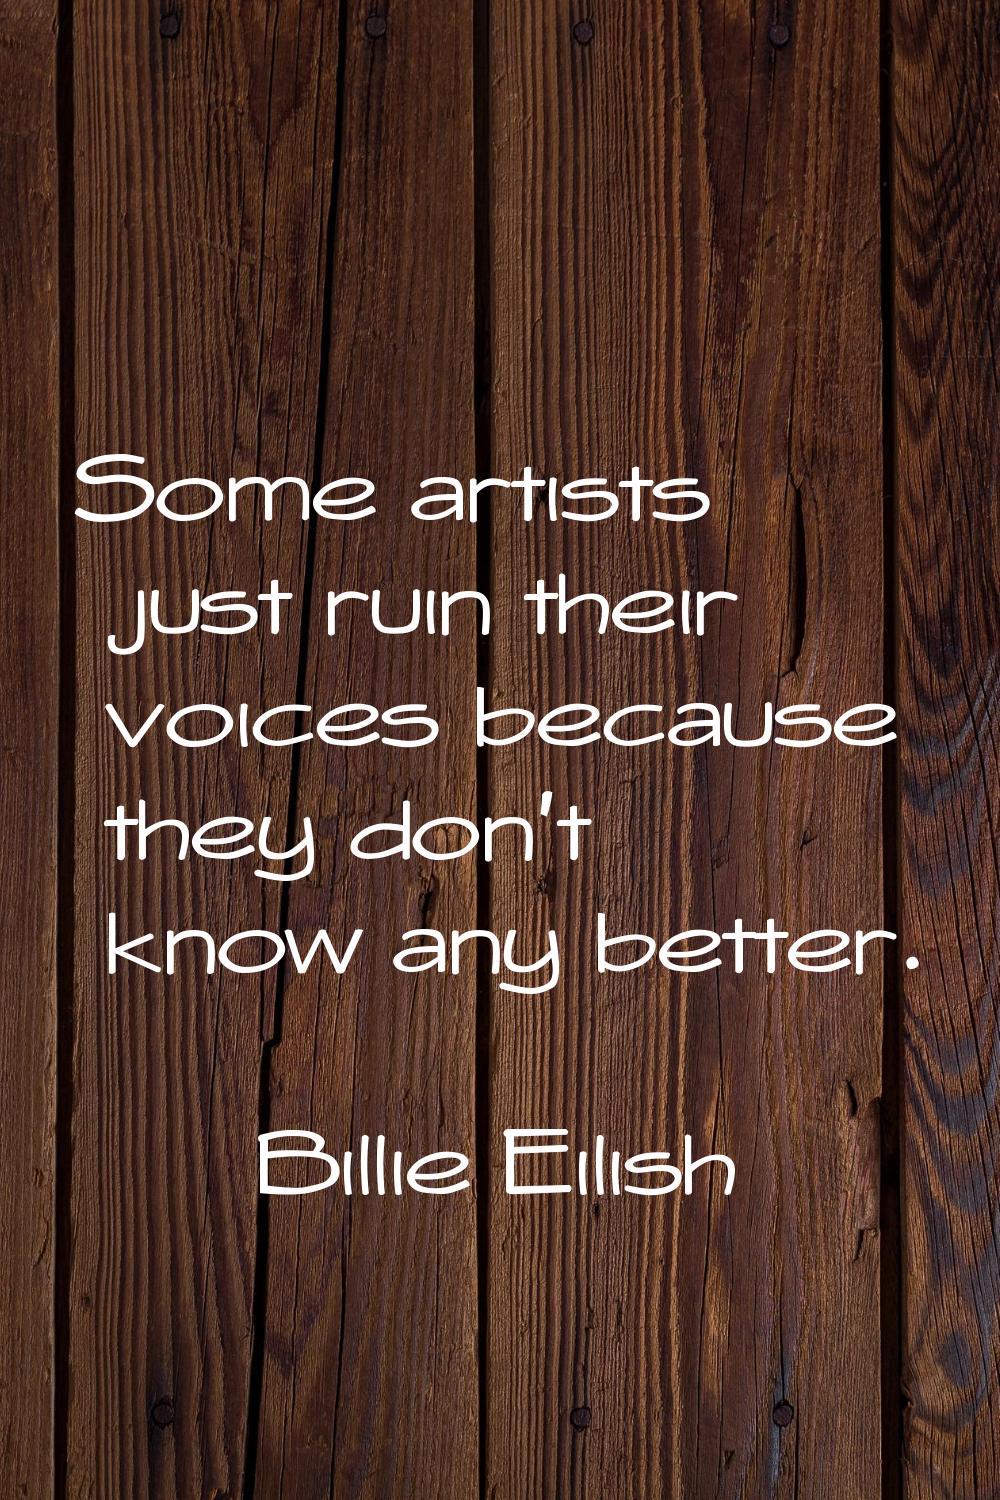 Some artists just ruin their voices because they don't know any better.